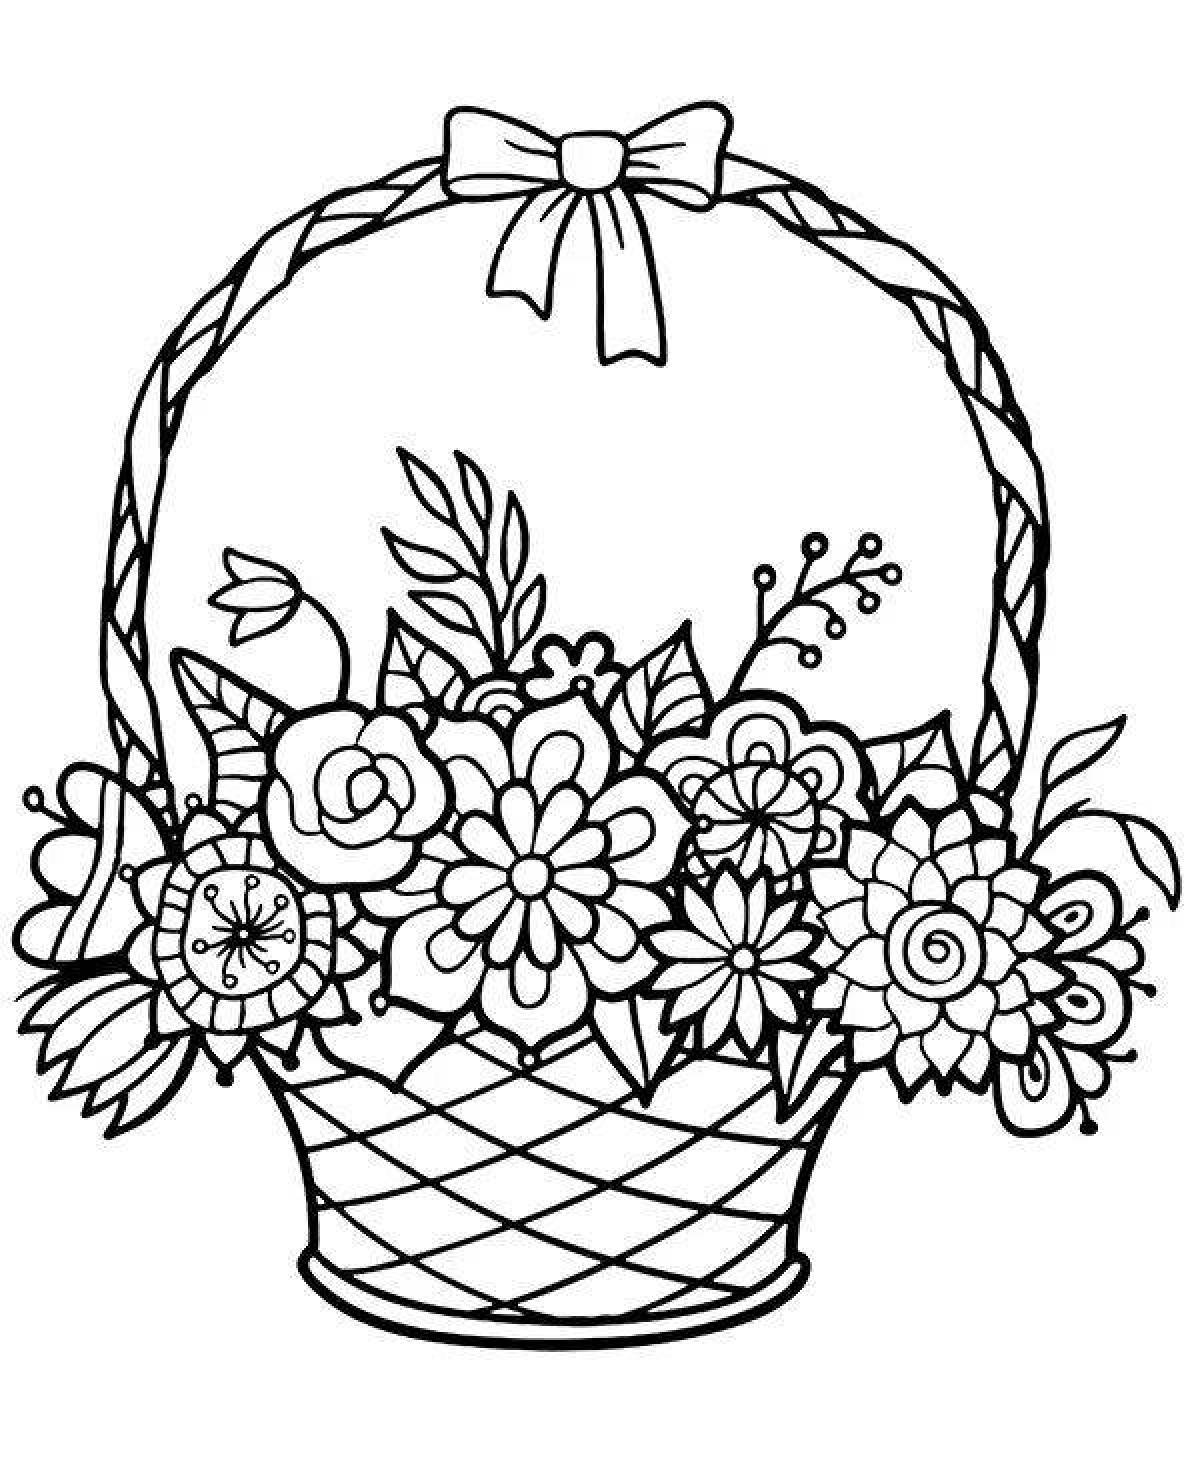 Coloring book gorgeous basket of flowers